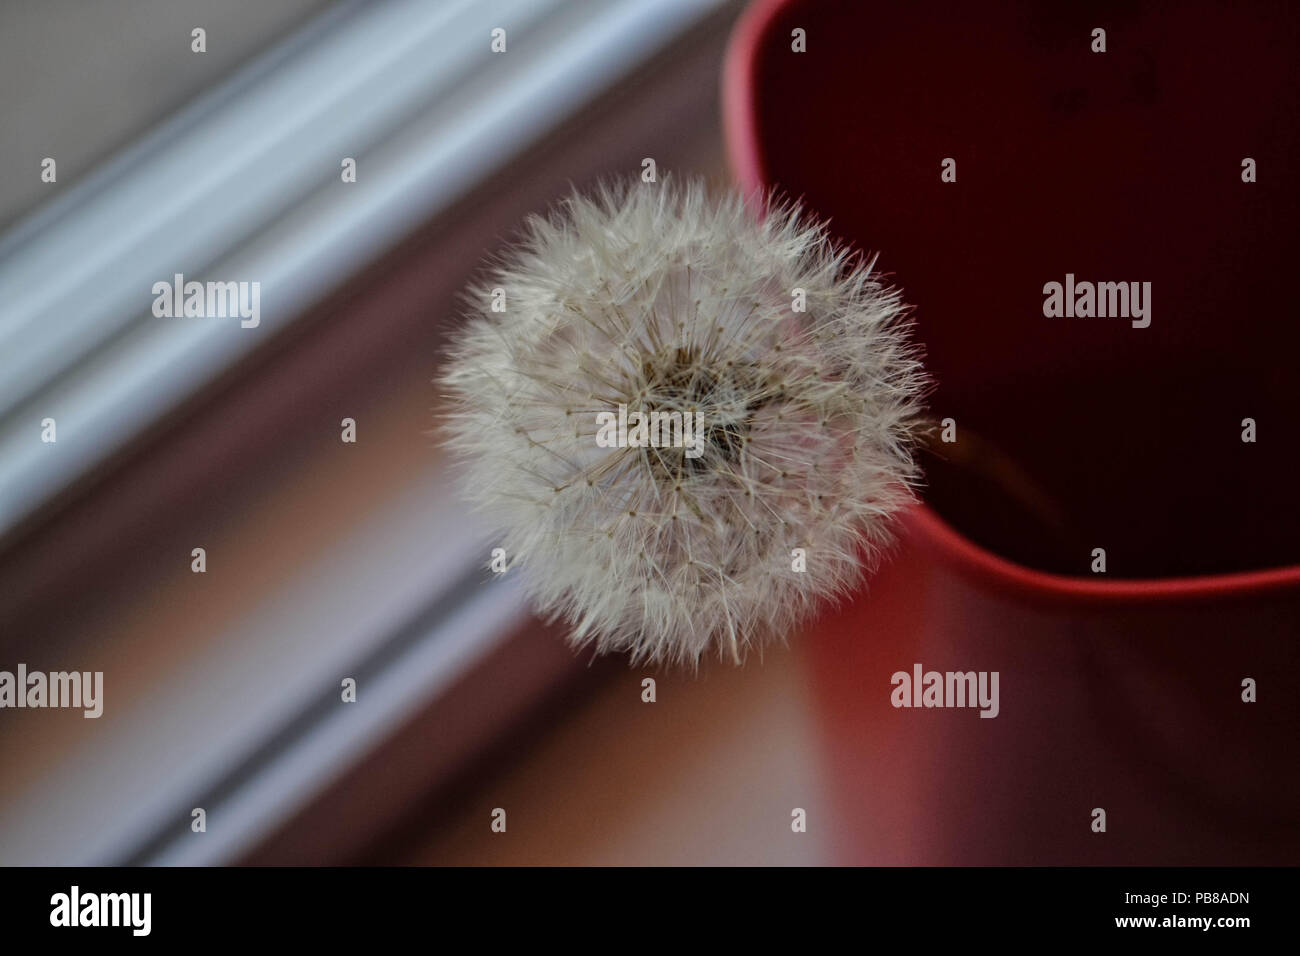 Closeup of fluffy dandelion in red enamel cup Stock Photo